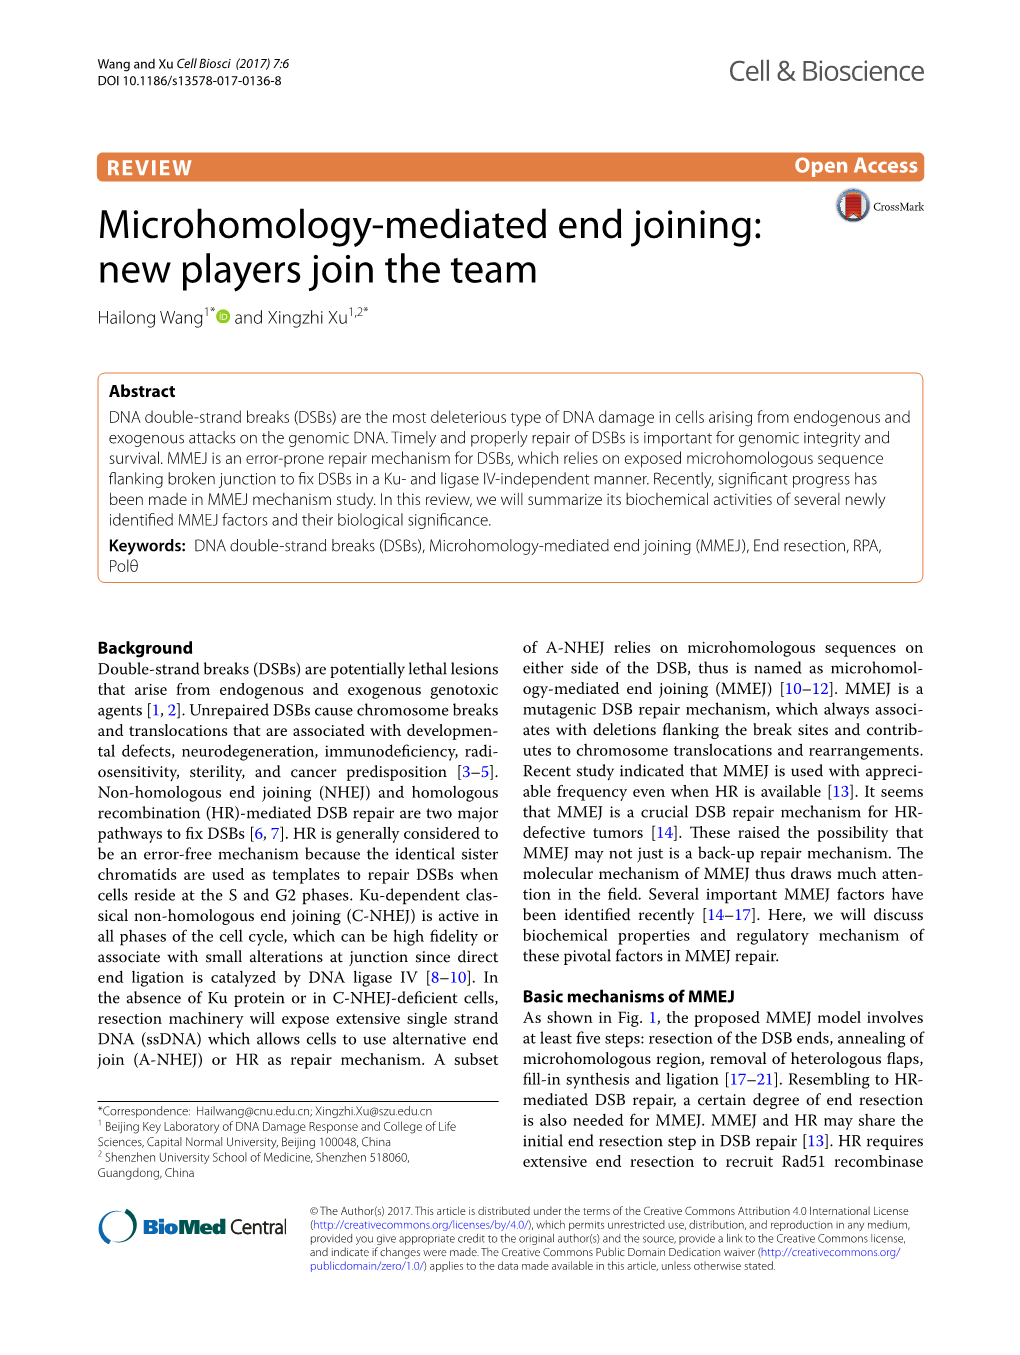 Microhomology-Mediated End Joining (MMEJ), End Resection, RPA, Polθ